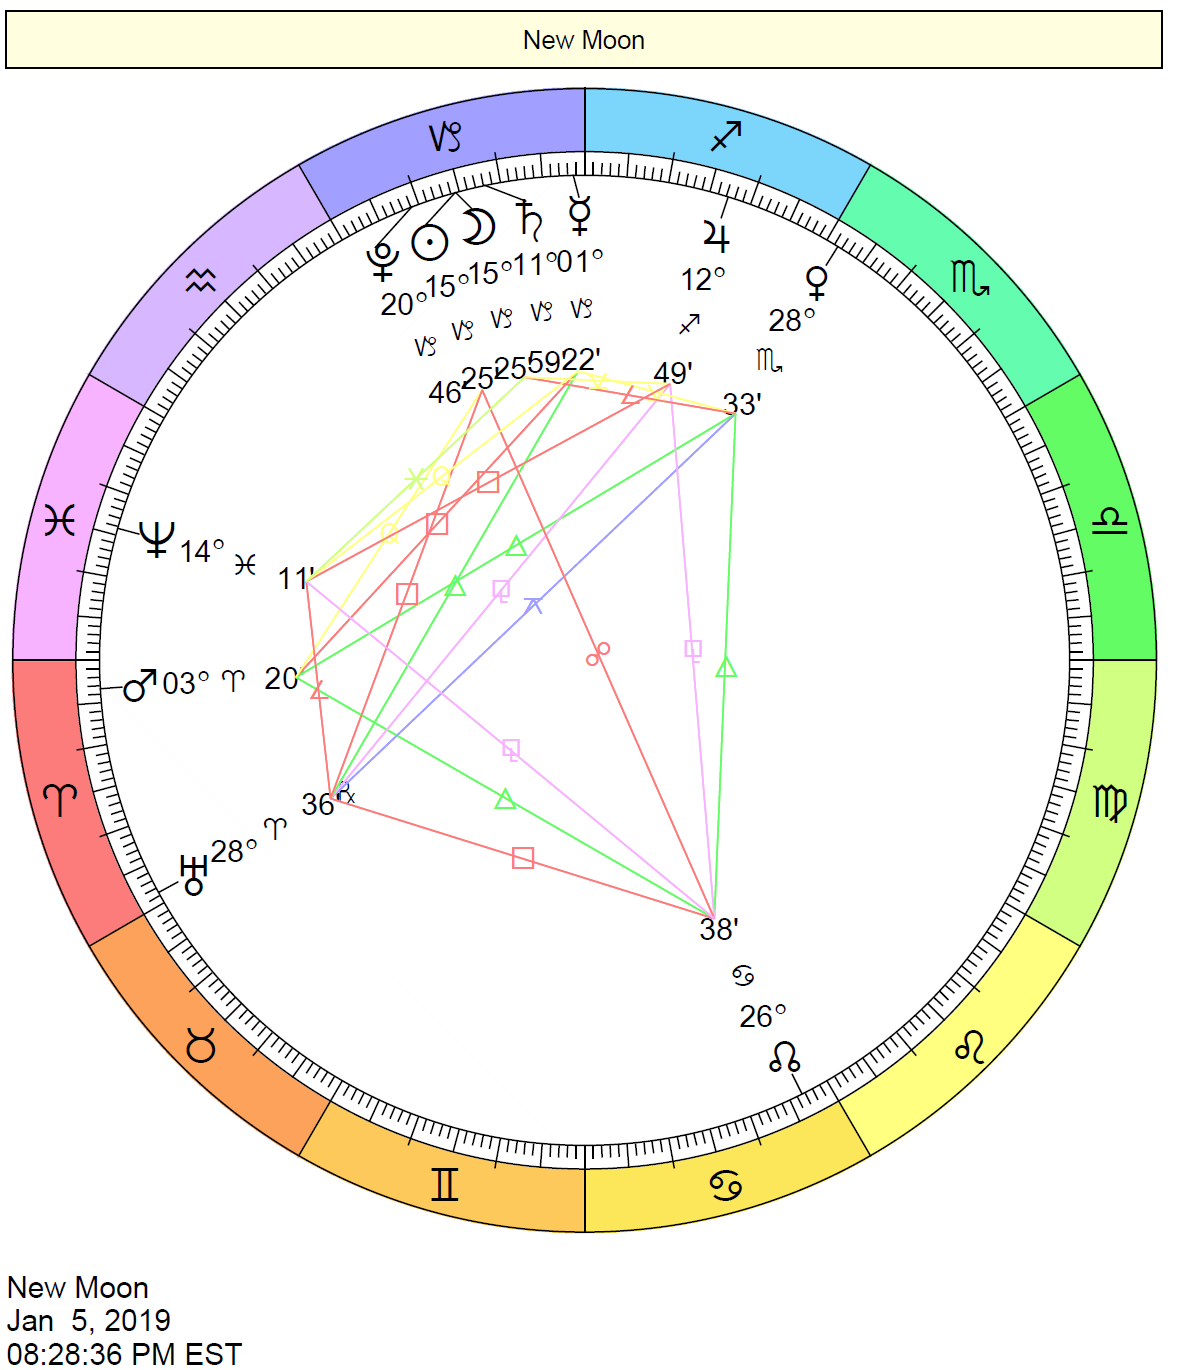 Solar Eclipse in Capricorn chart wheel depicts the Sun and Moon together (conjunct) in the sign